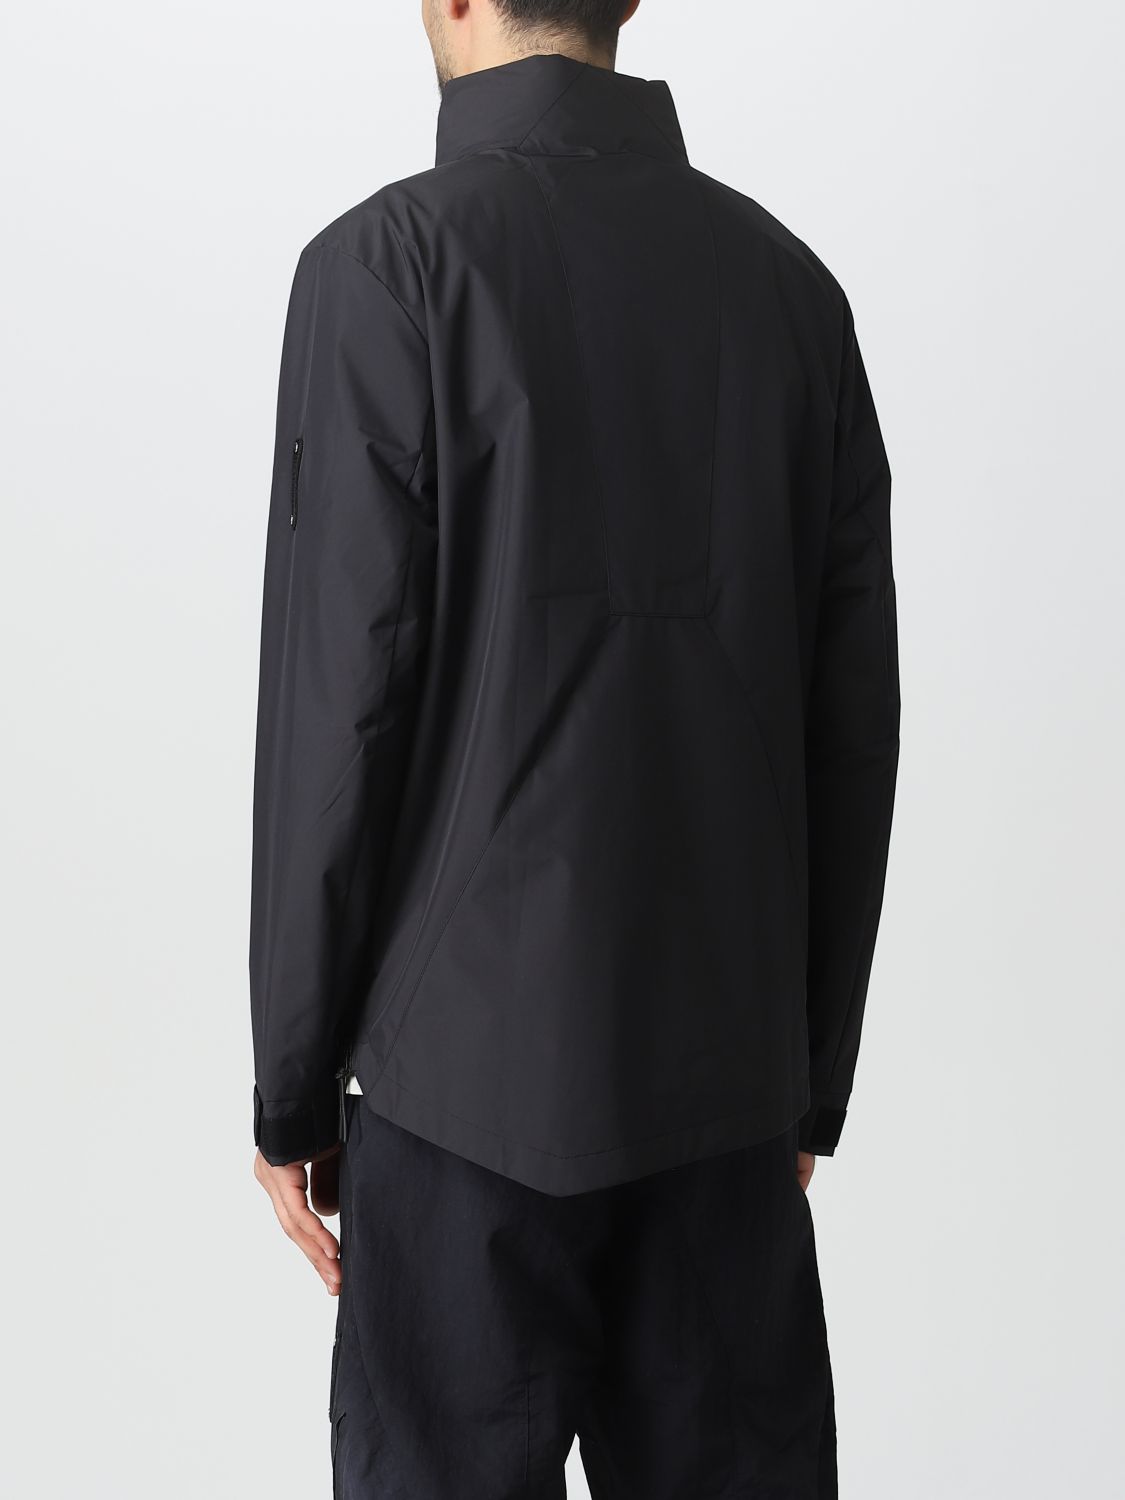 A-COLD-WALL*: jacket for man - Black | A-Cold-Wall* jacket MO144 online ...